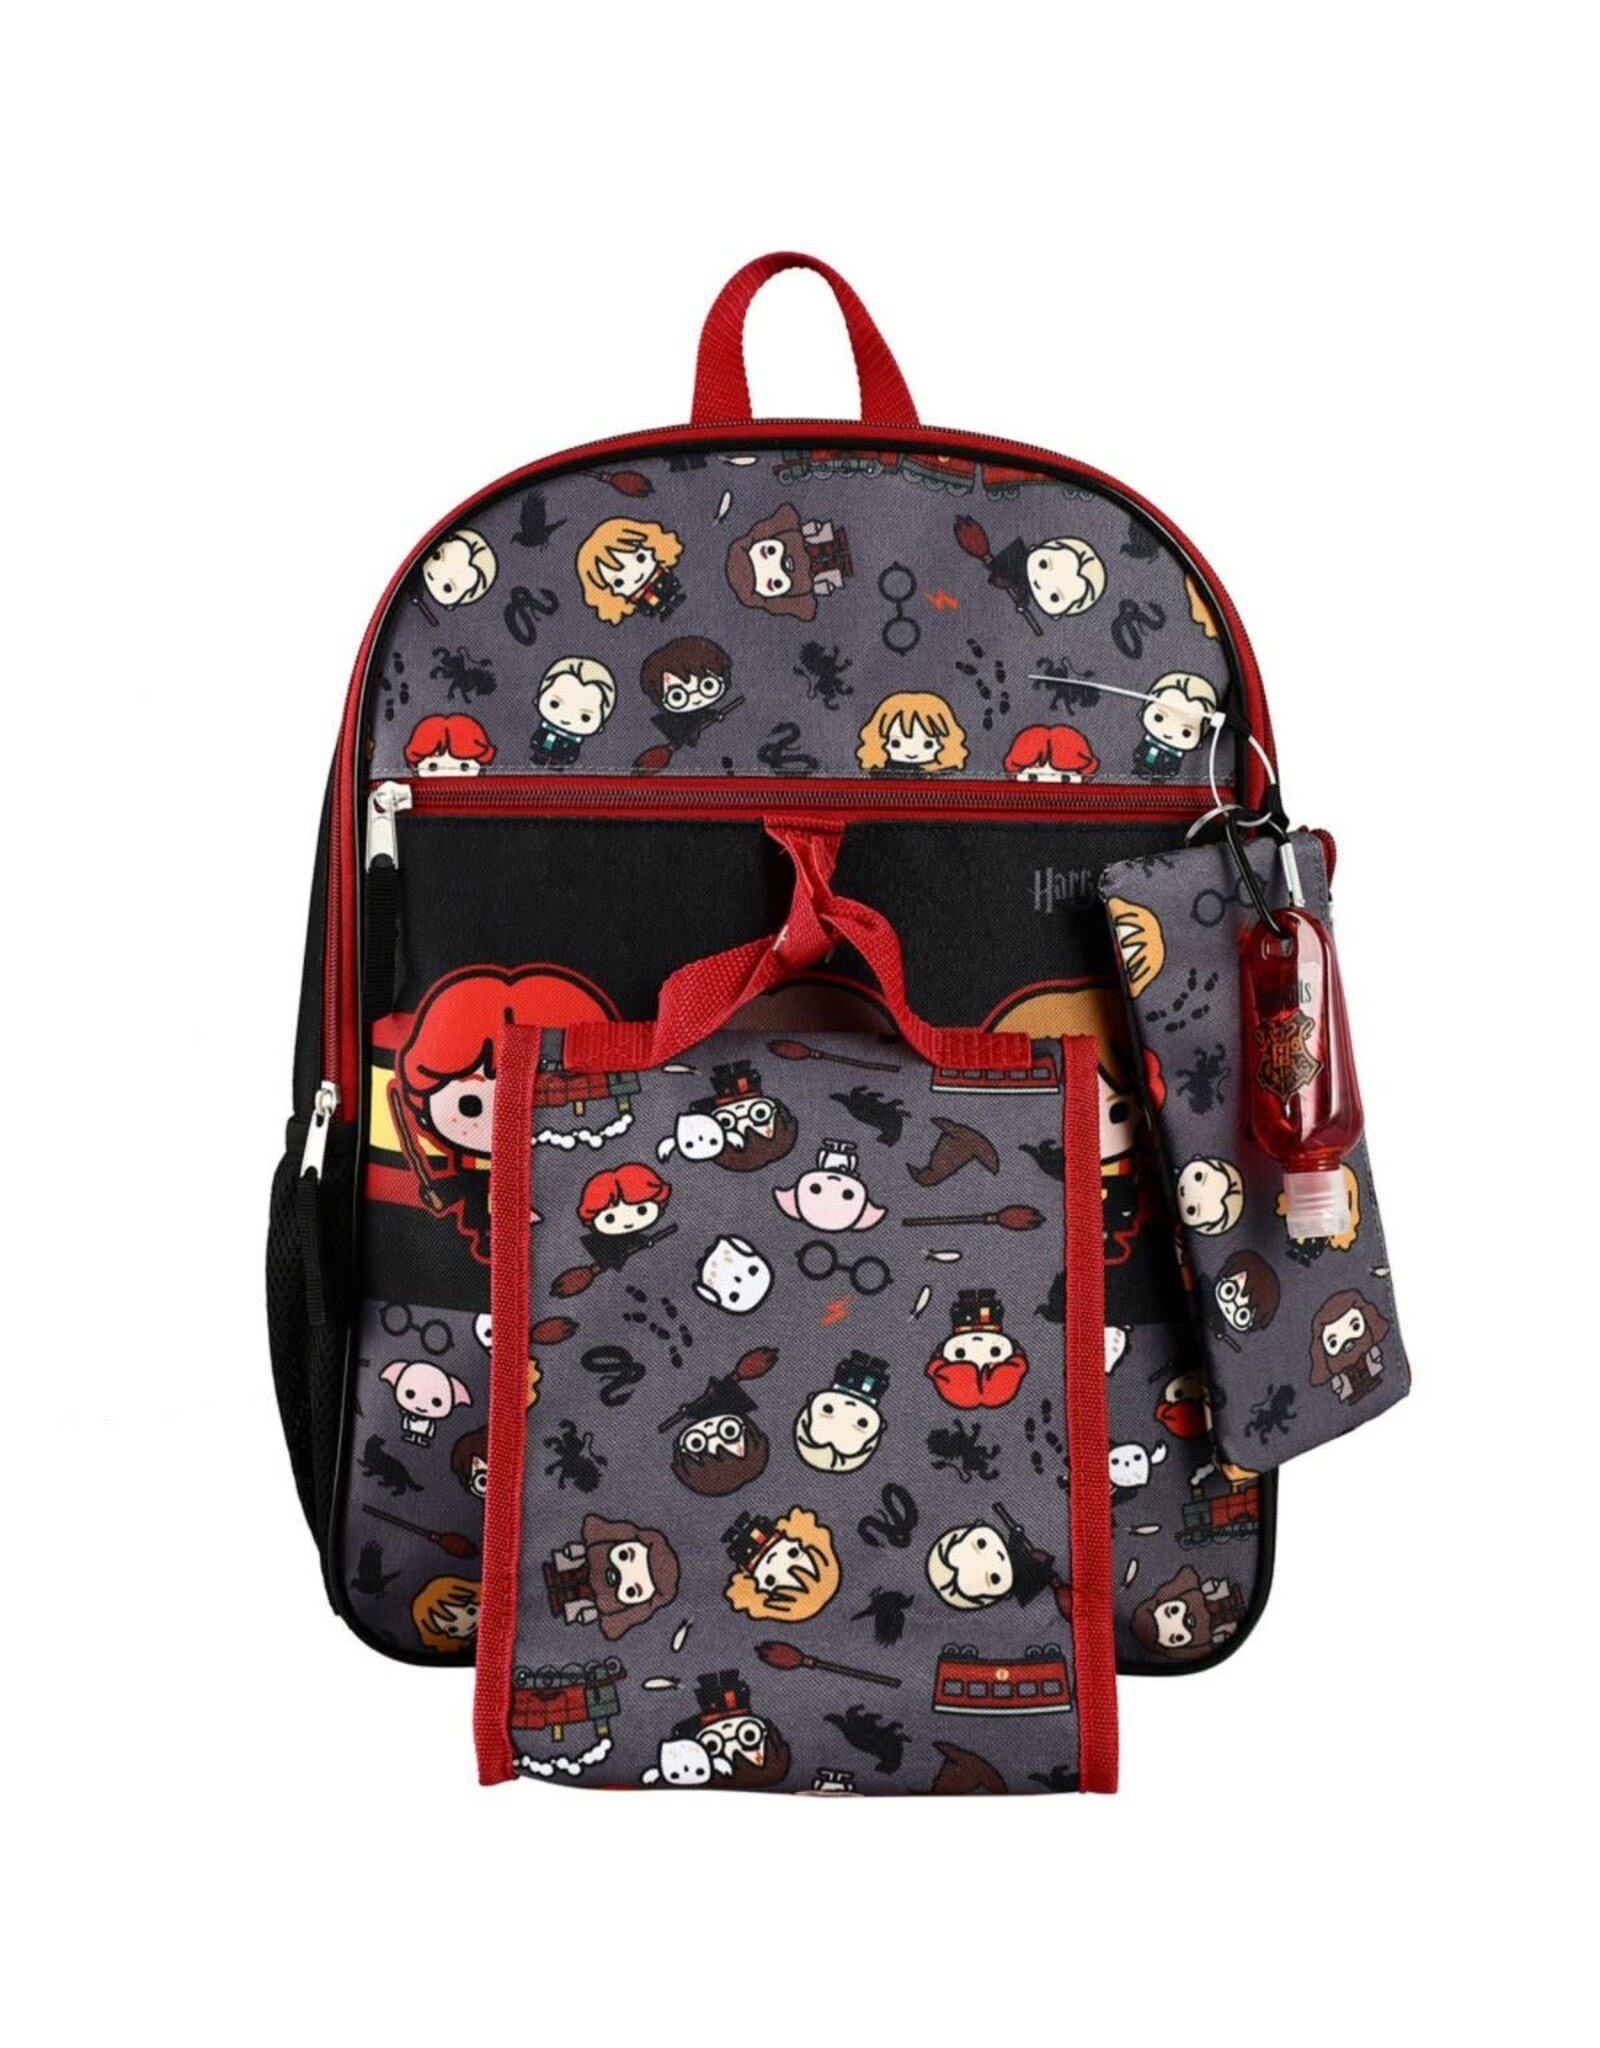 Bioworld Harry Potter Chibi Characters 16" Backpack 5 Piece Set